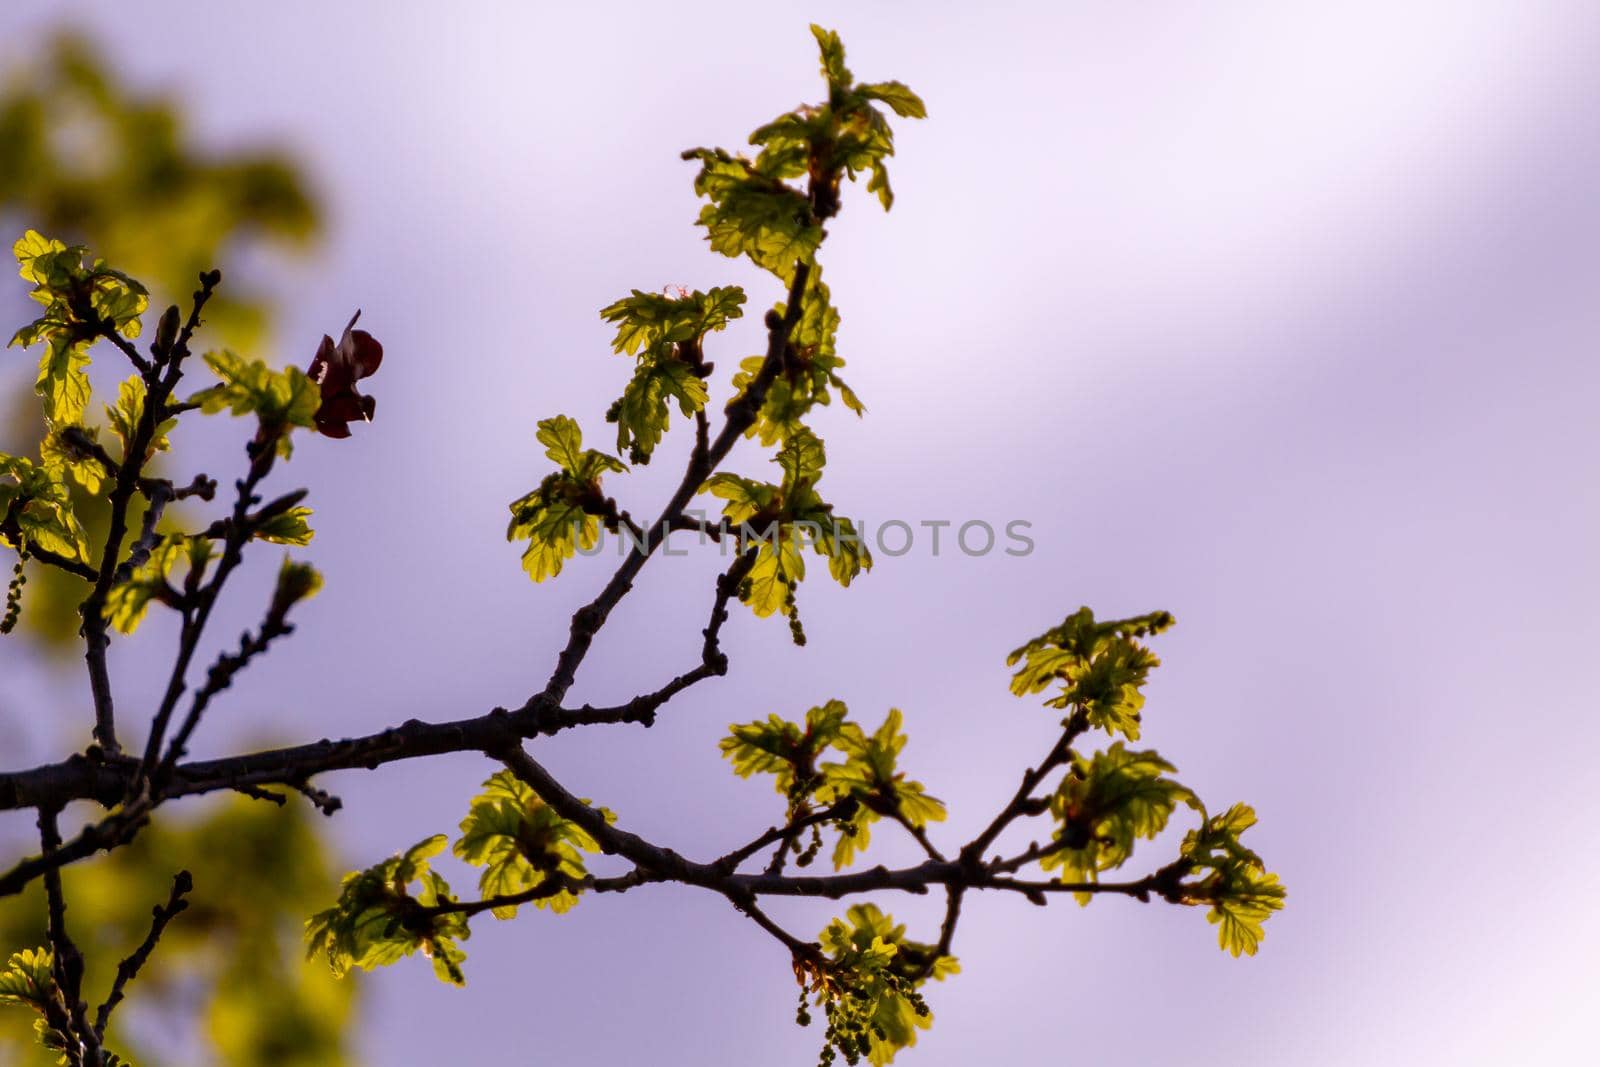 Backlit Green Leaves In A Tree by AlbertoPascual